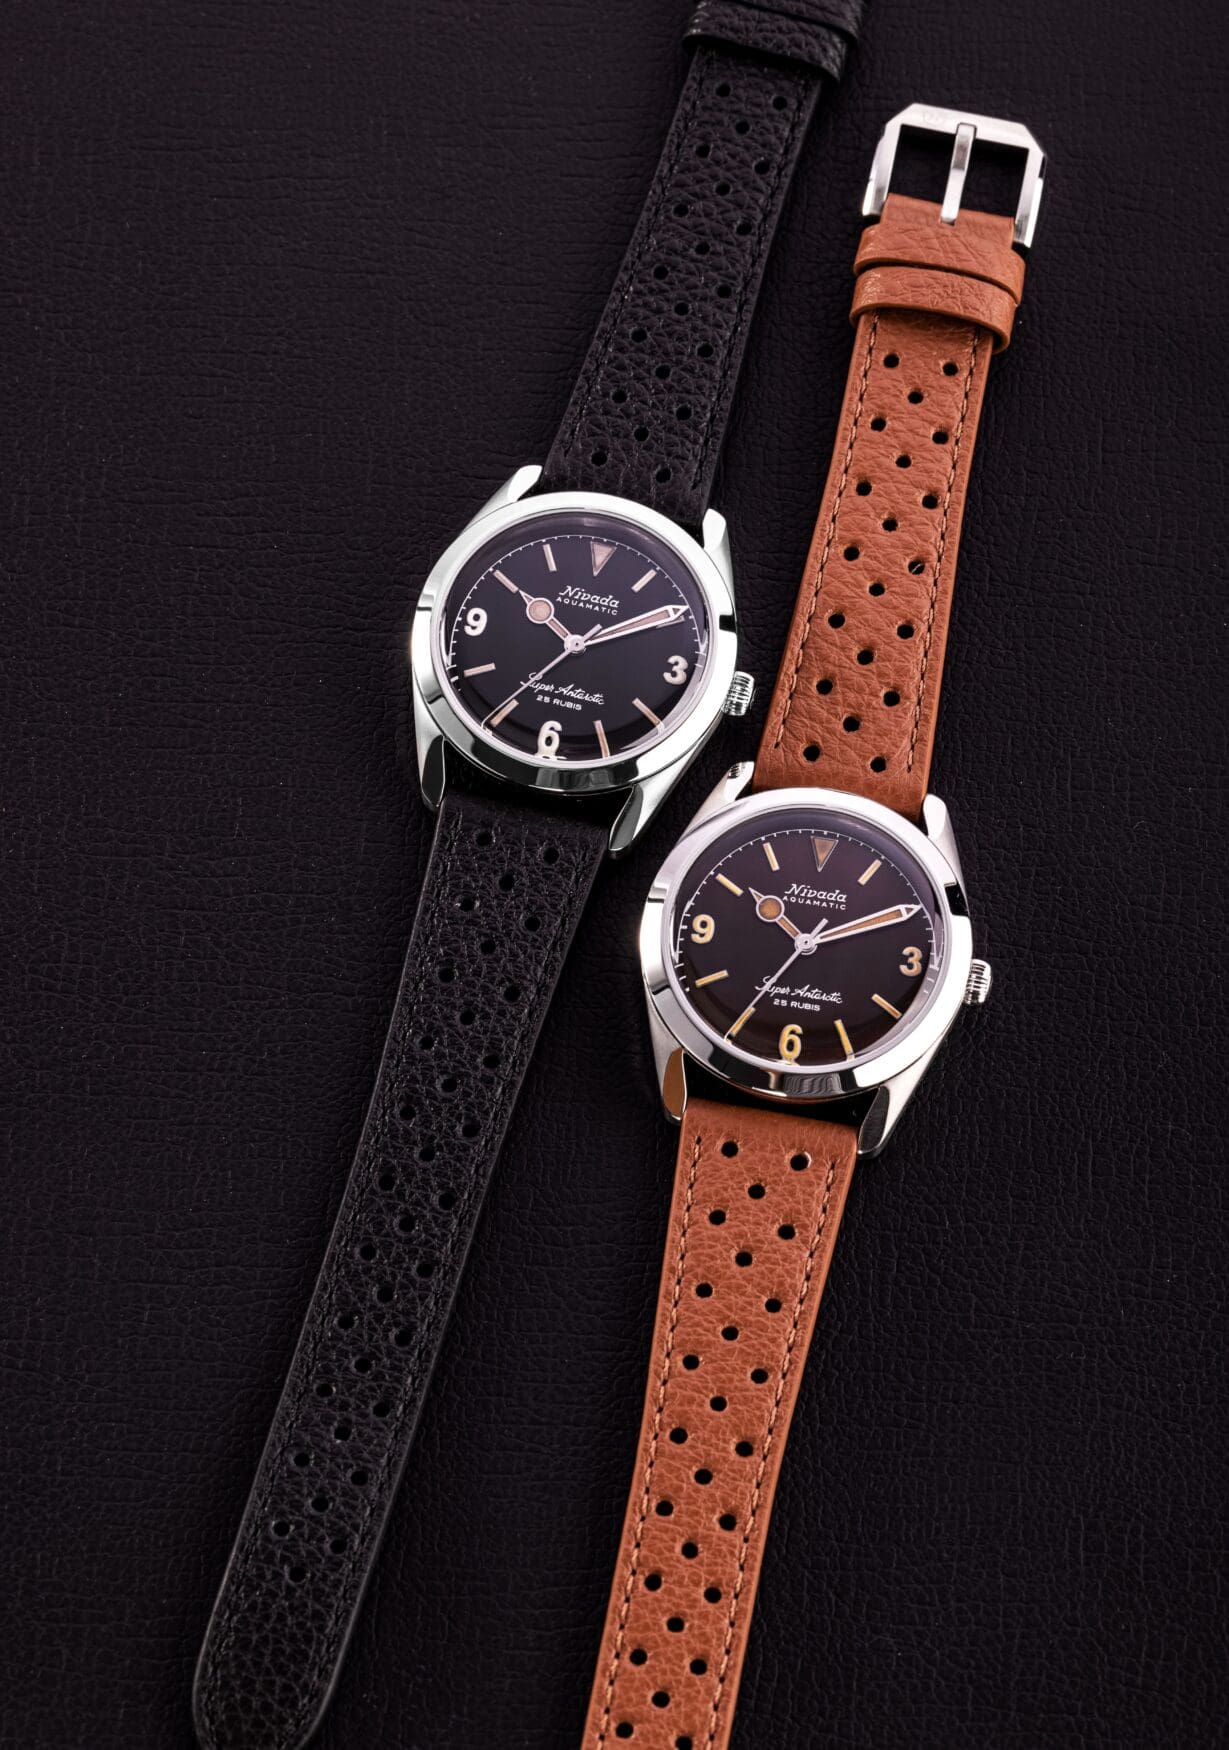 Go modern vintage with the Nivada Grenchen Super Antarctic 3/6/9